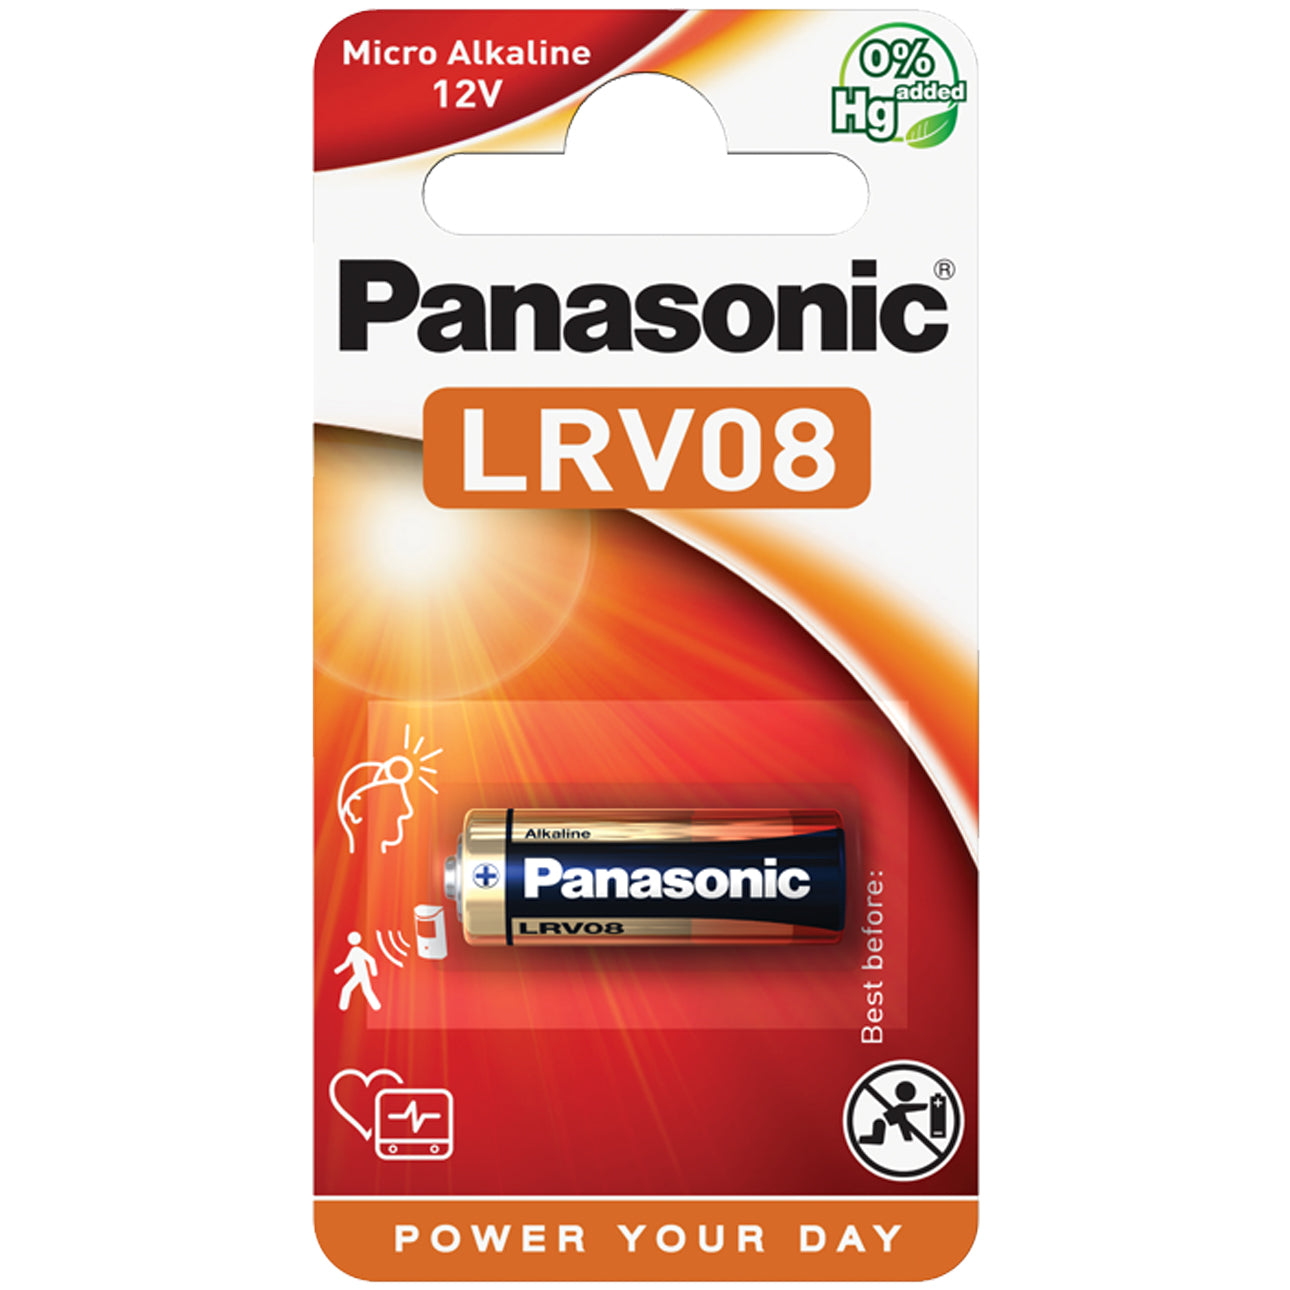 Panasonic LRV08 23A MN21 A23 12V Battery for Remote Controls - Pack of 1 - maplin.co.uk